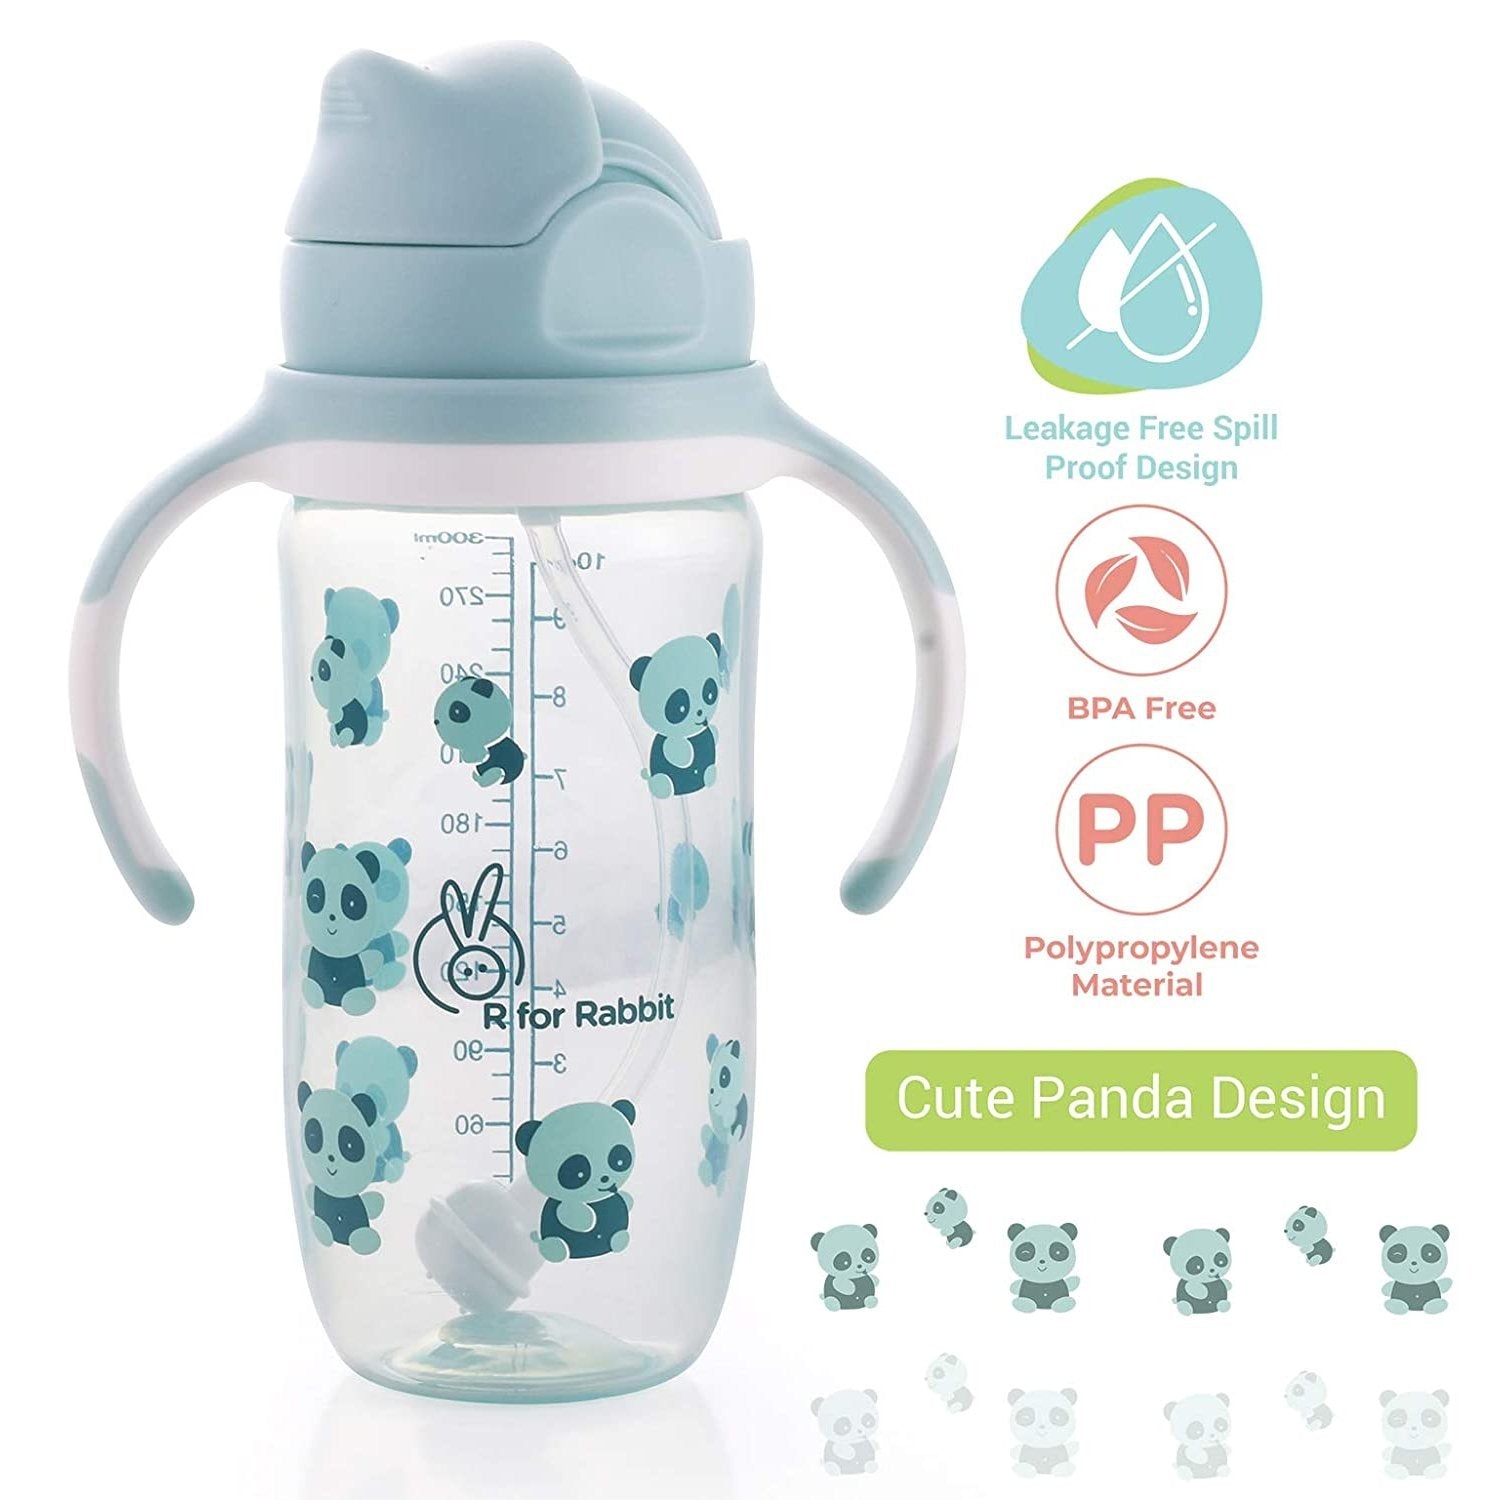 R FOR RABBIT Spill Free Bubble Sipper With Twin Handle For Babies - Blue - 300ml,9m+